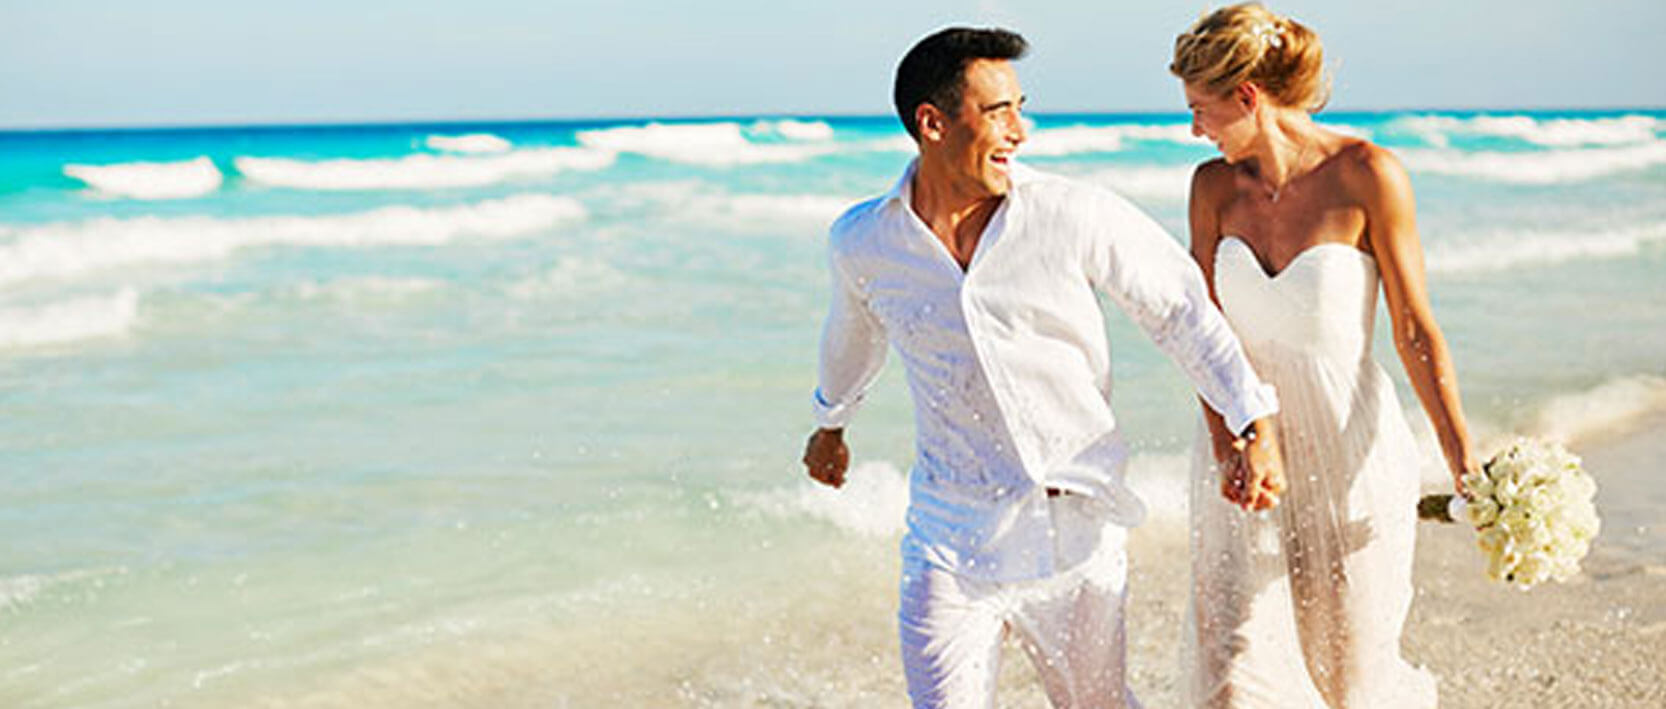 Hyatt Zilara Cancun Spa - For Just the Two of You Wedding Package